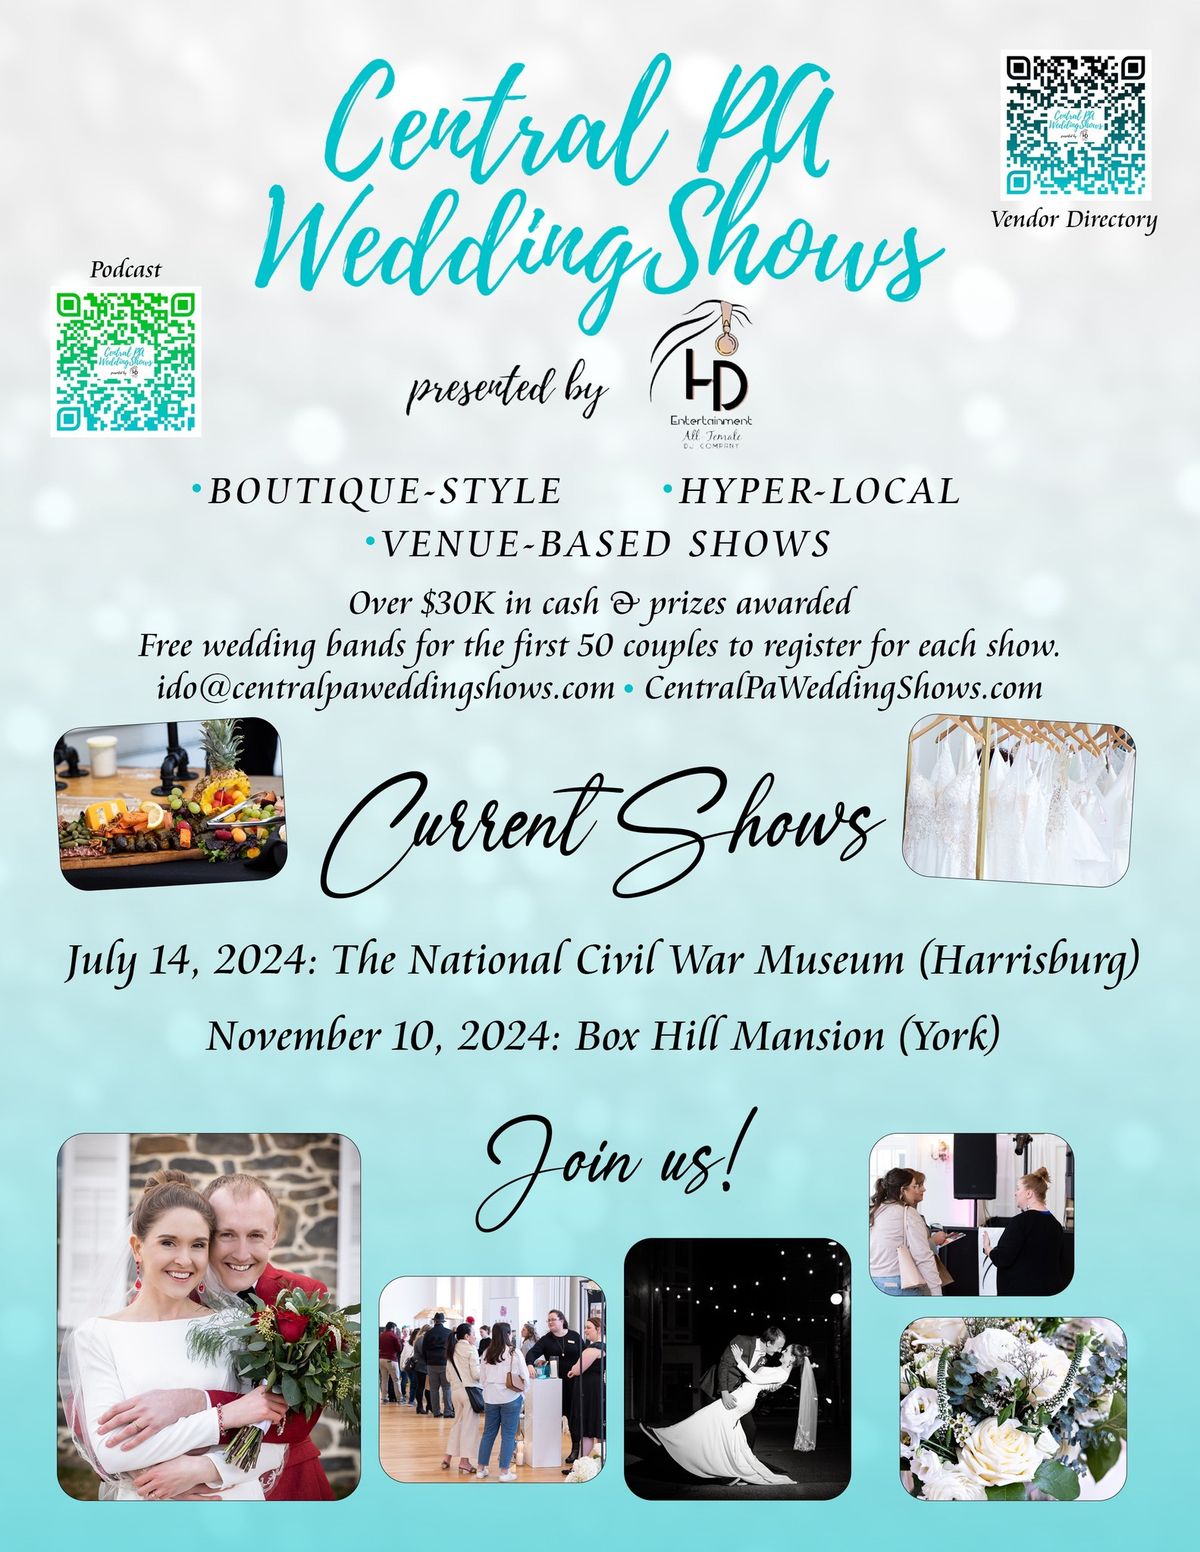 Central PA Wedding Shows